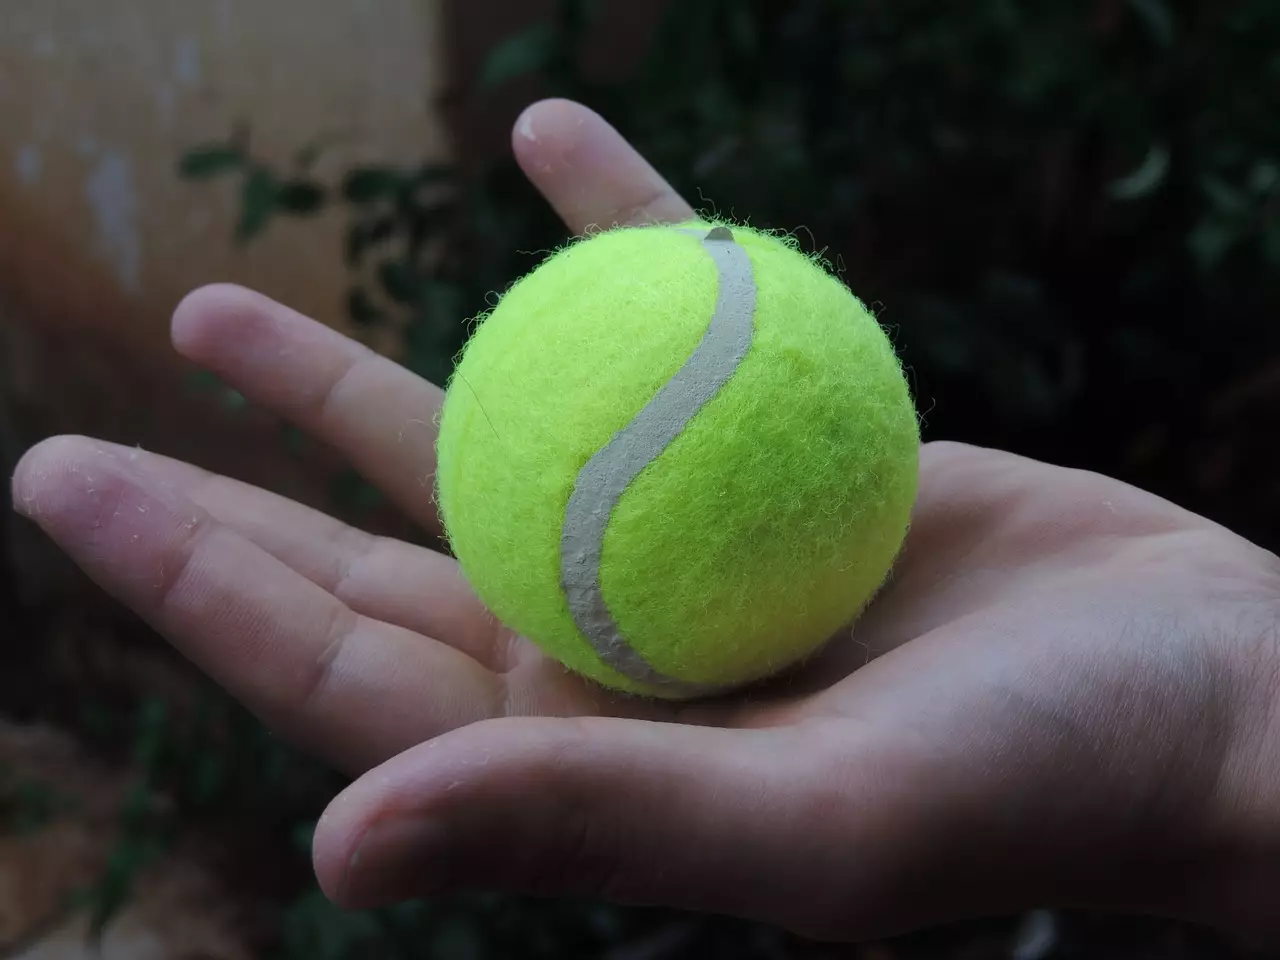 You can even massage your back using tennis balls (